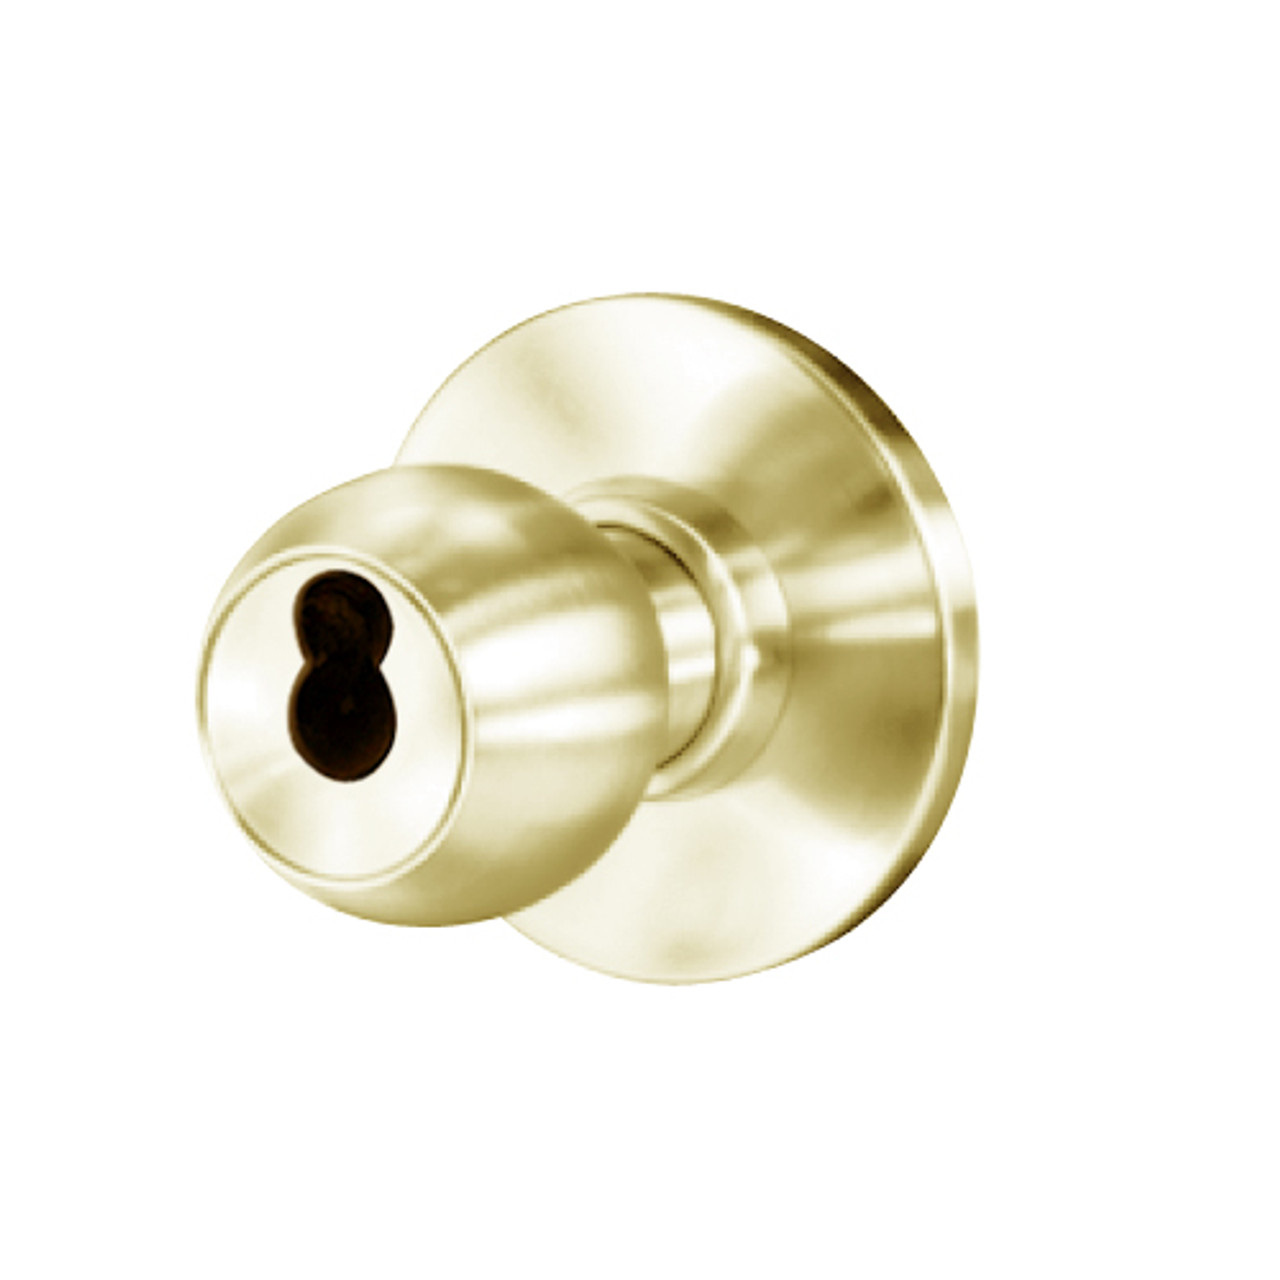 8K57S4AS3606 Best 8K Series Communicating Heavy Duty Cylindrical Knob Locks with Round Style in Satin Brass